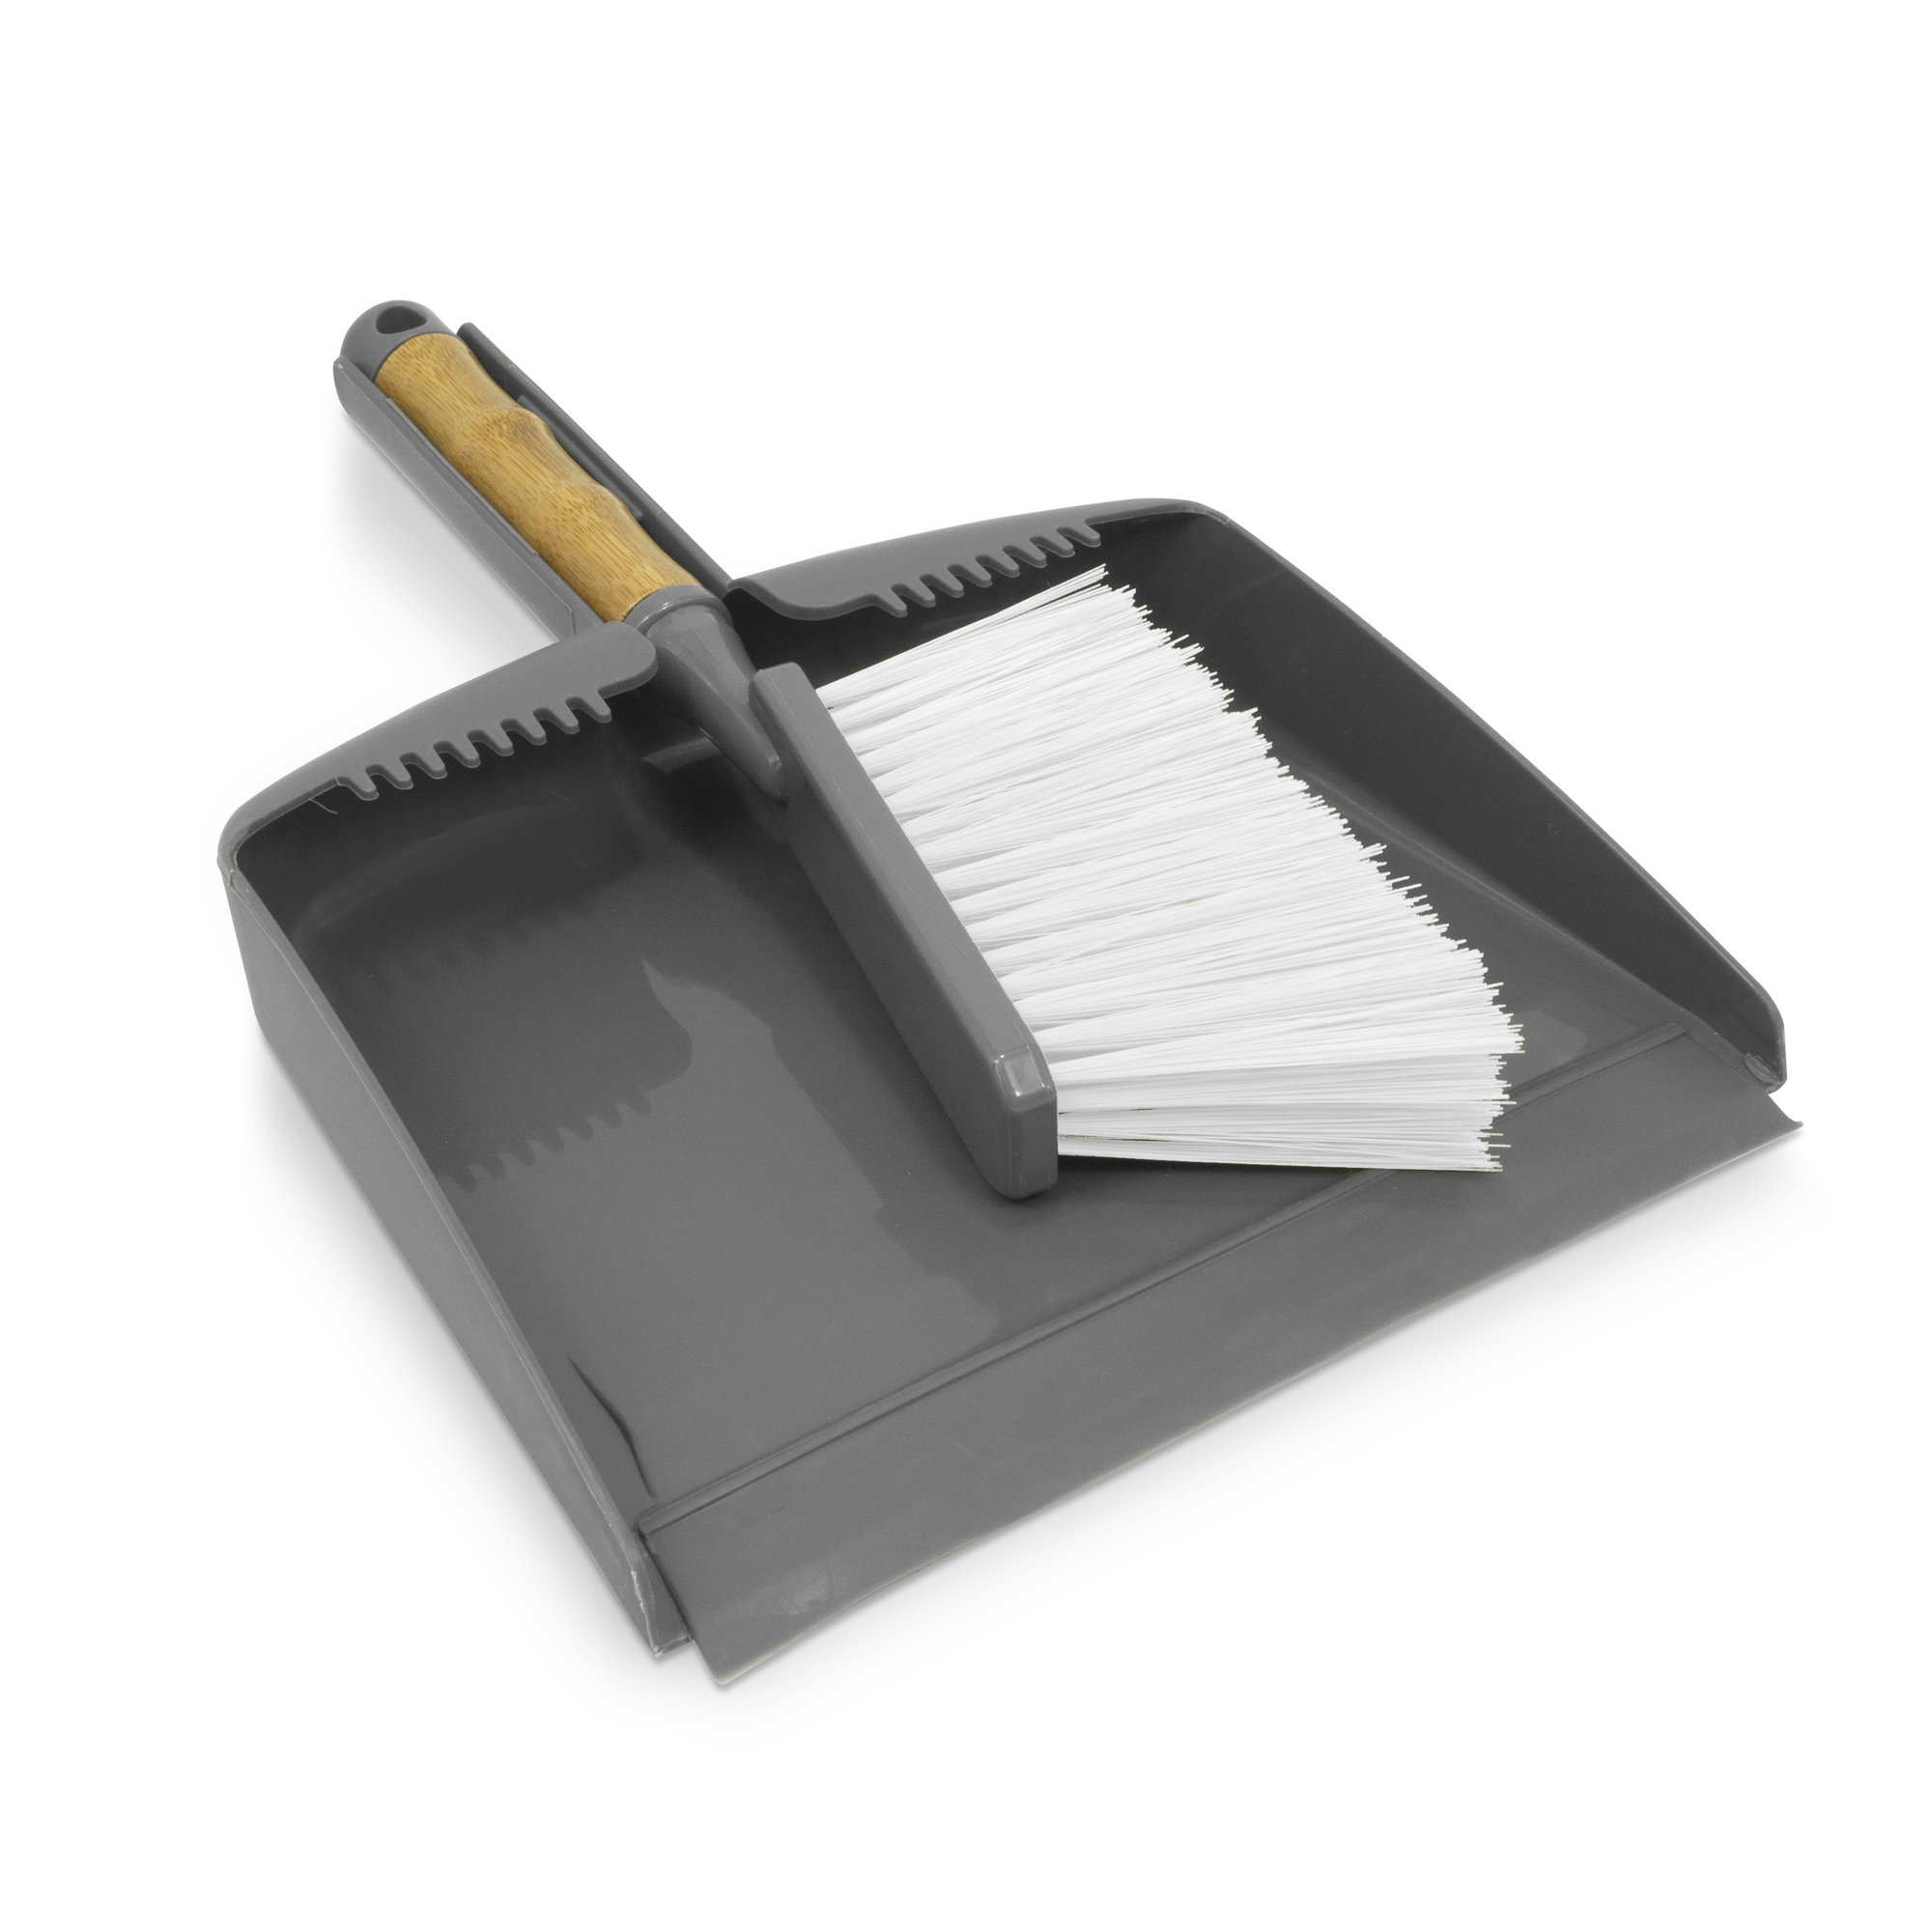 ANMINY Adjustable Broom And Dustpan Set with Replaceable Head & Reviews